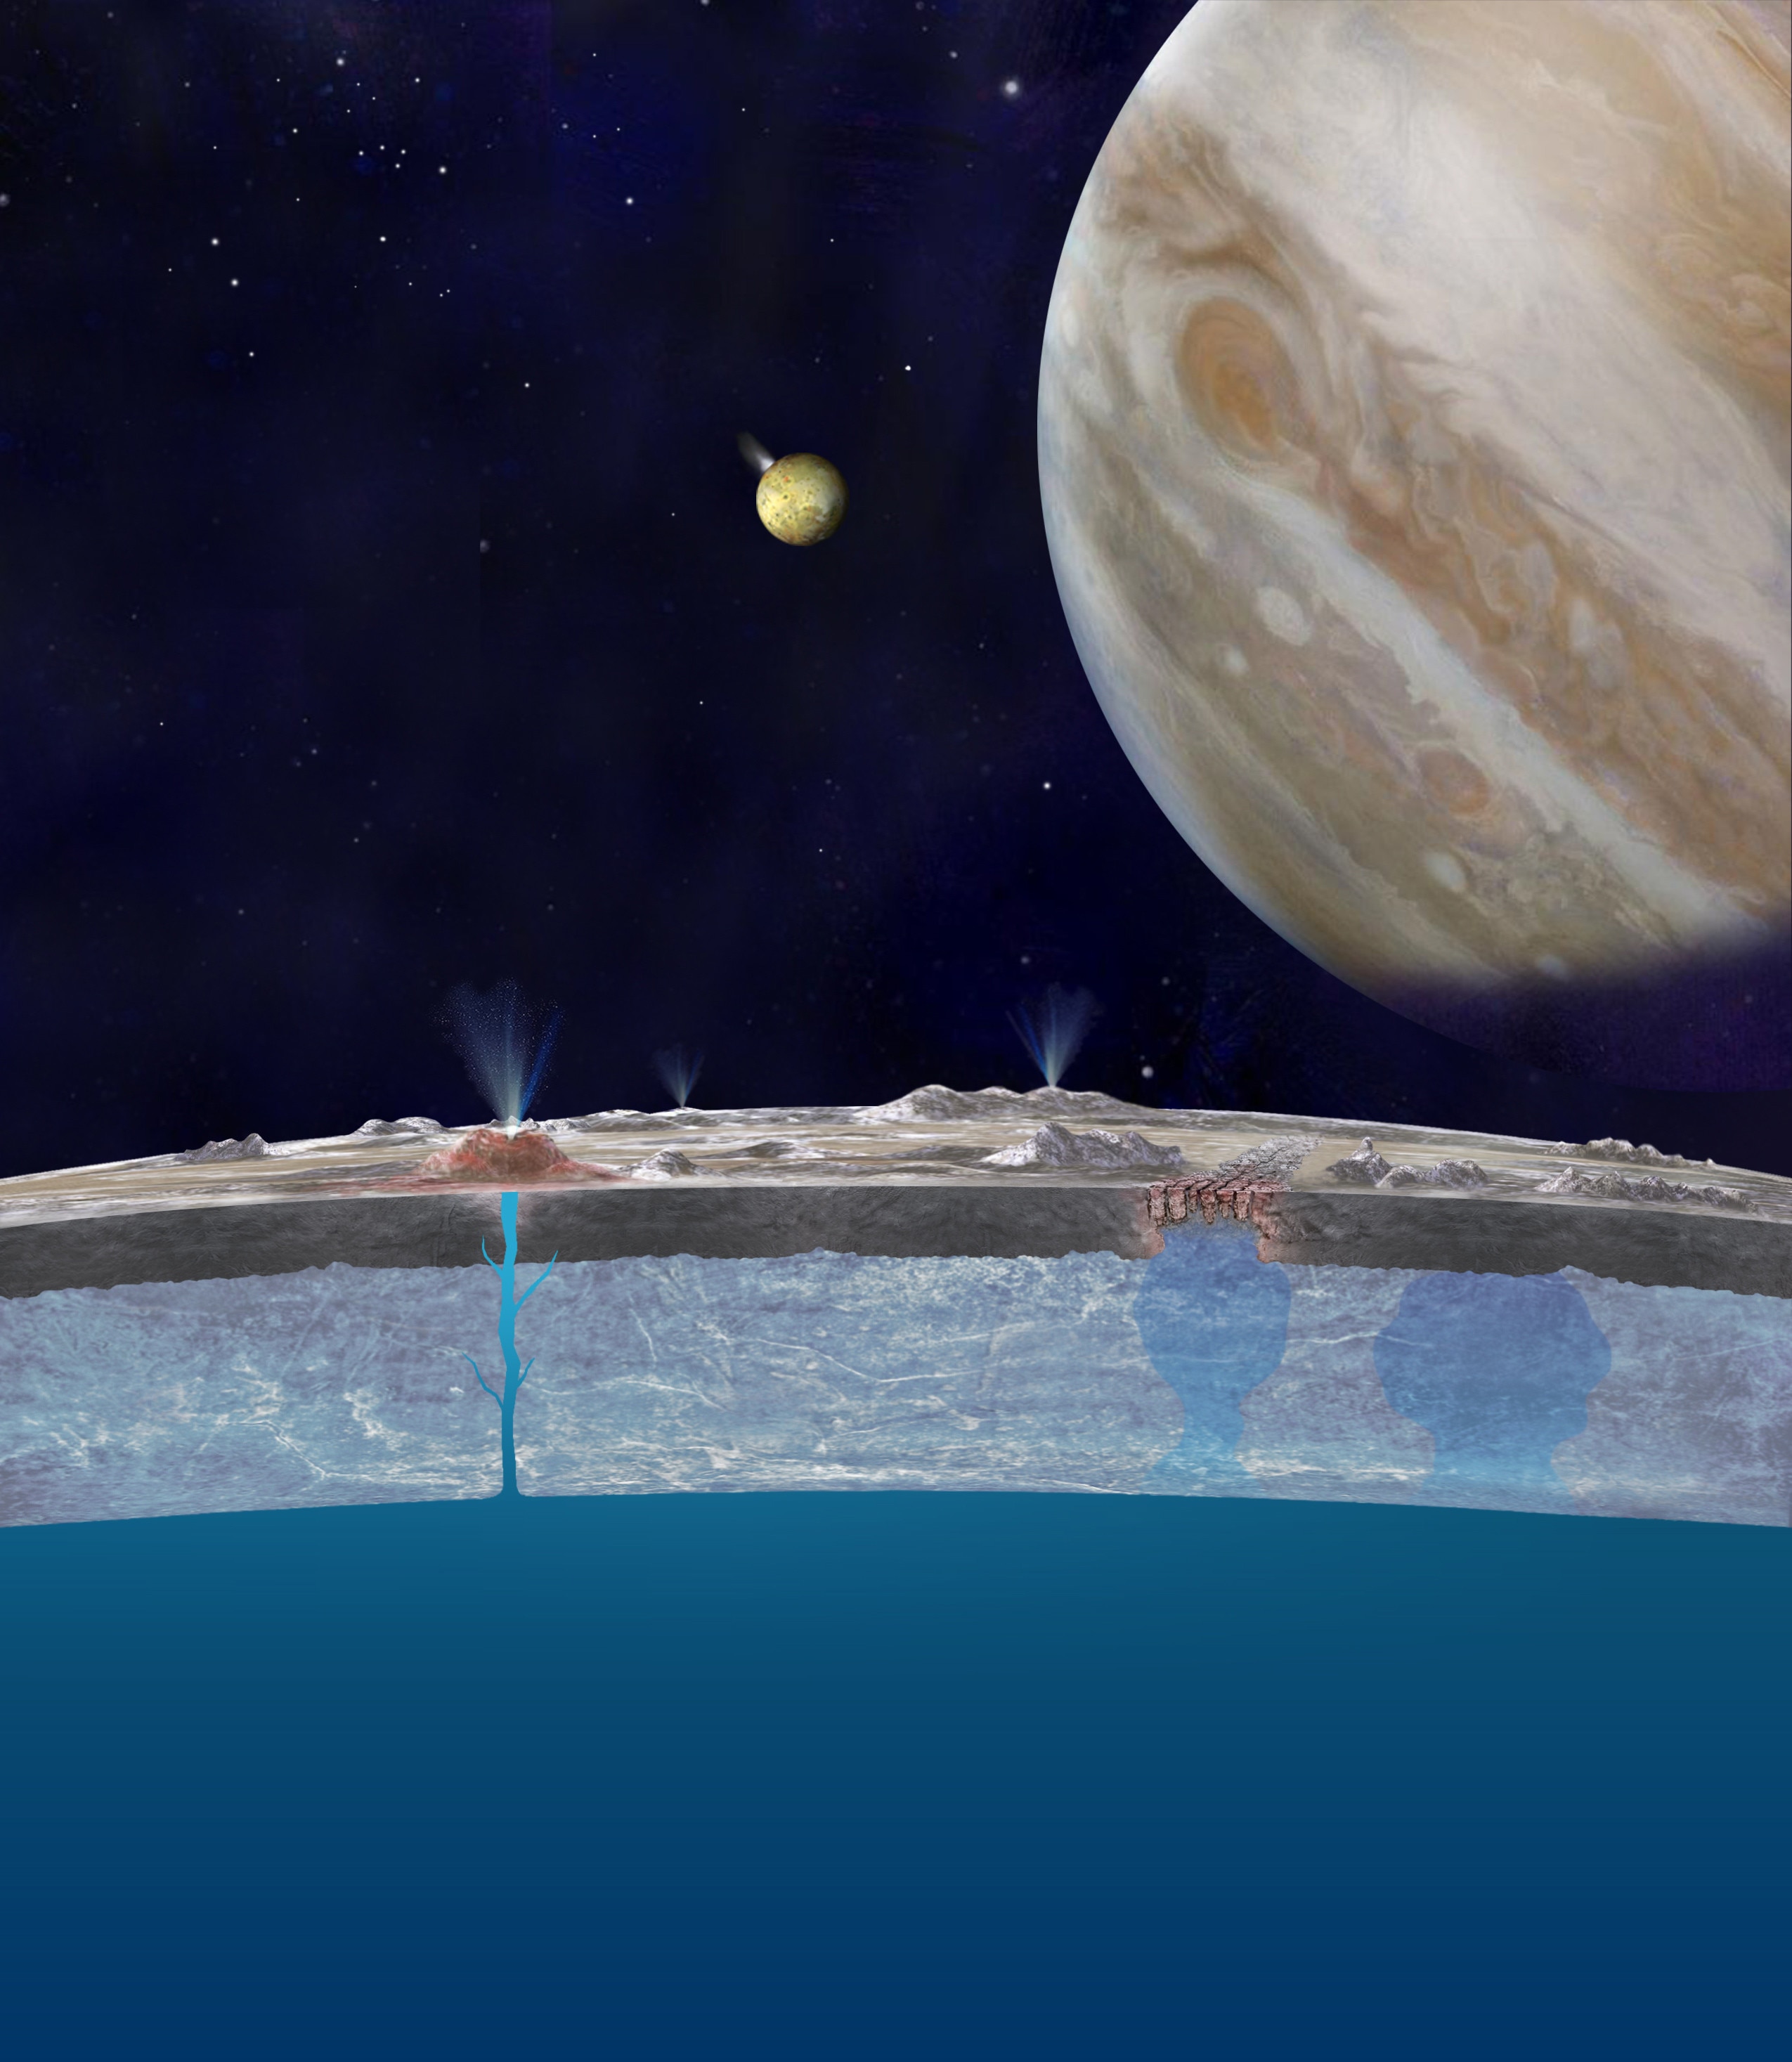 Europa has an undersurface ocean that may be feeding geysers on the surface. Credit: NASA/JPL-Caltech